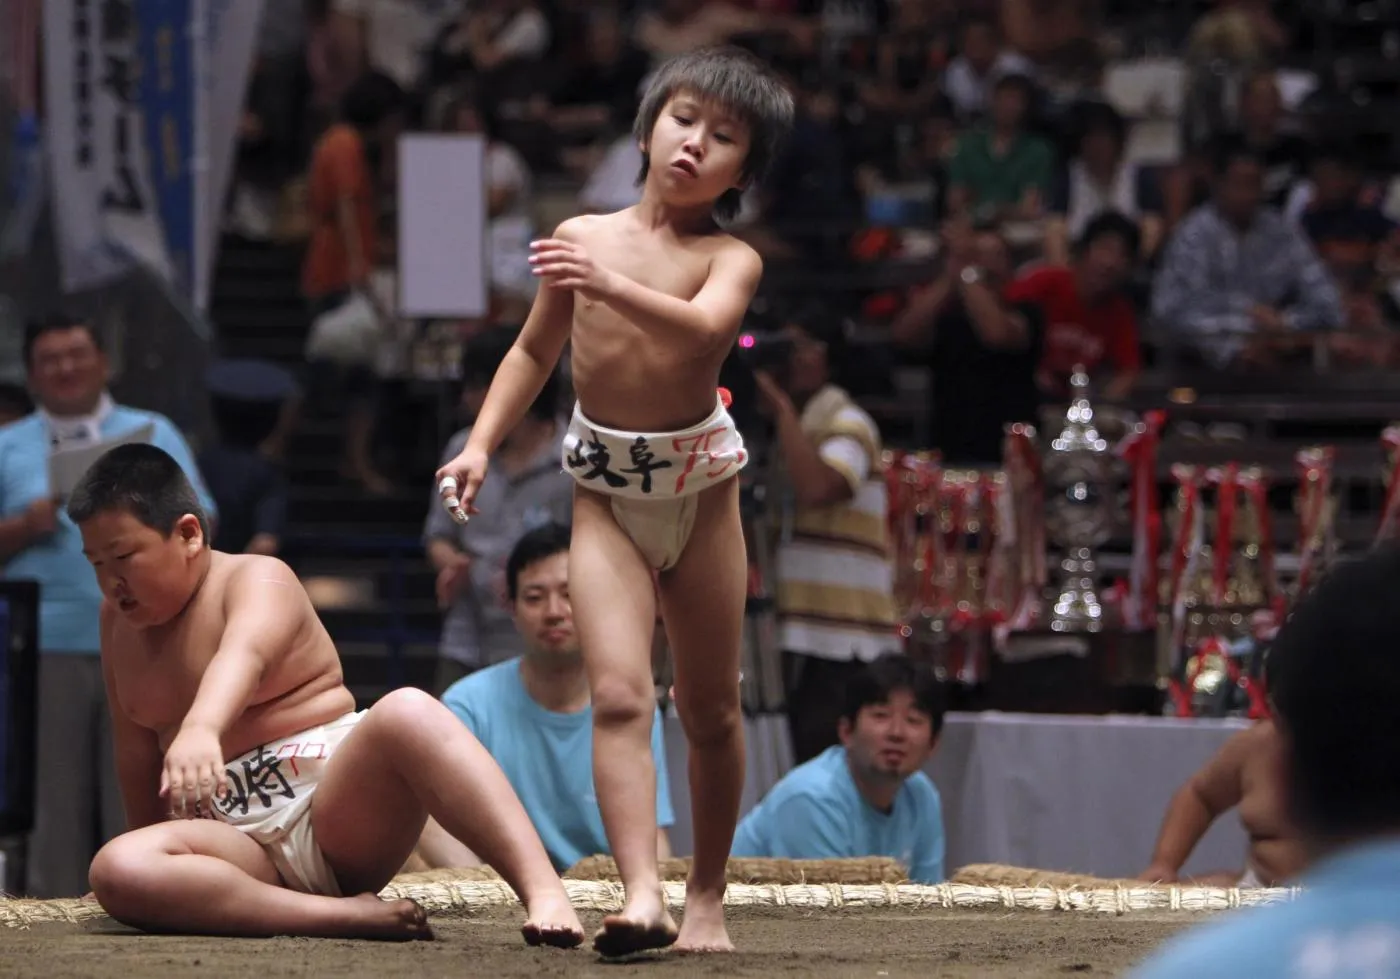 LaPresseIn this Sunday, July 29, 2012 photo, an elementary school sumo wres...